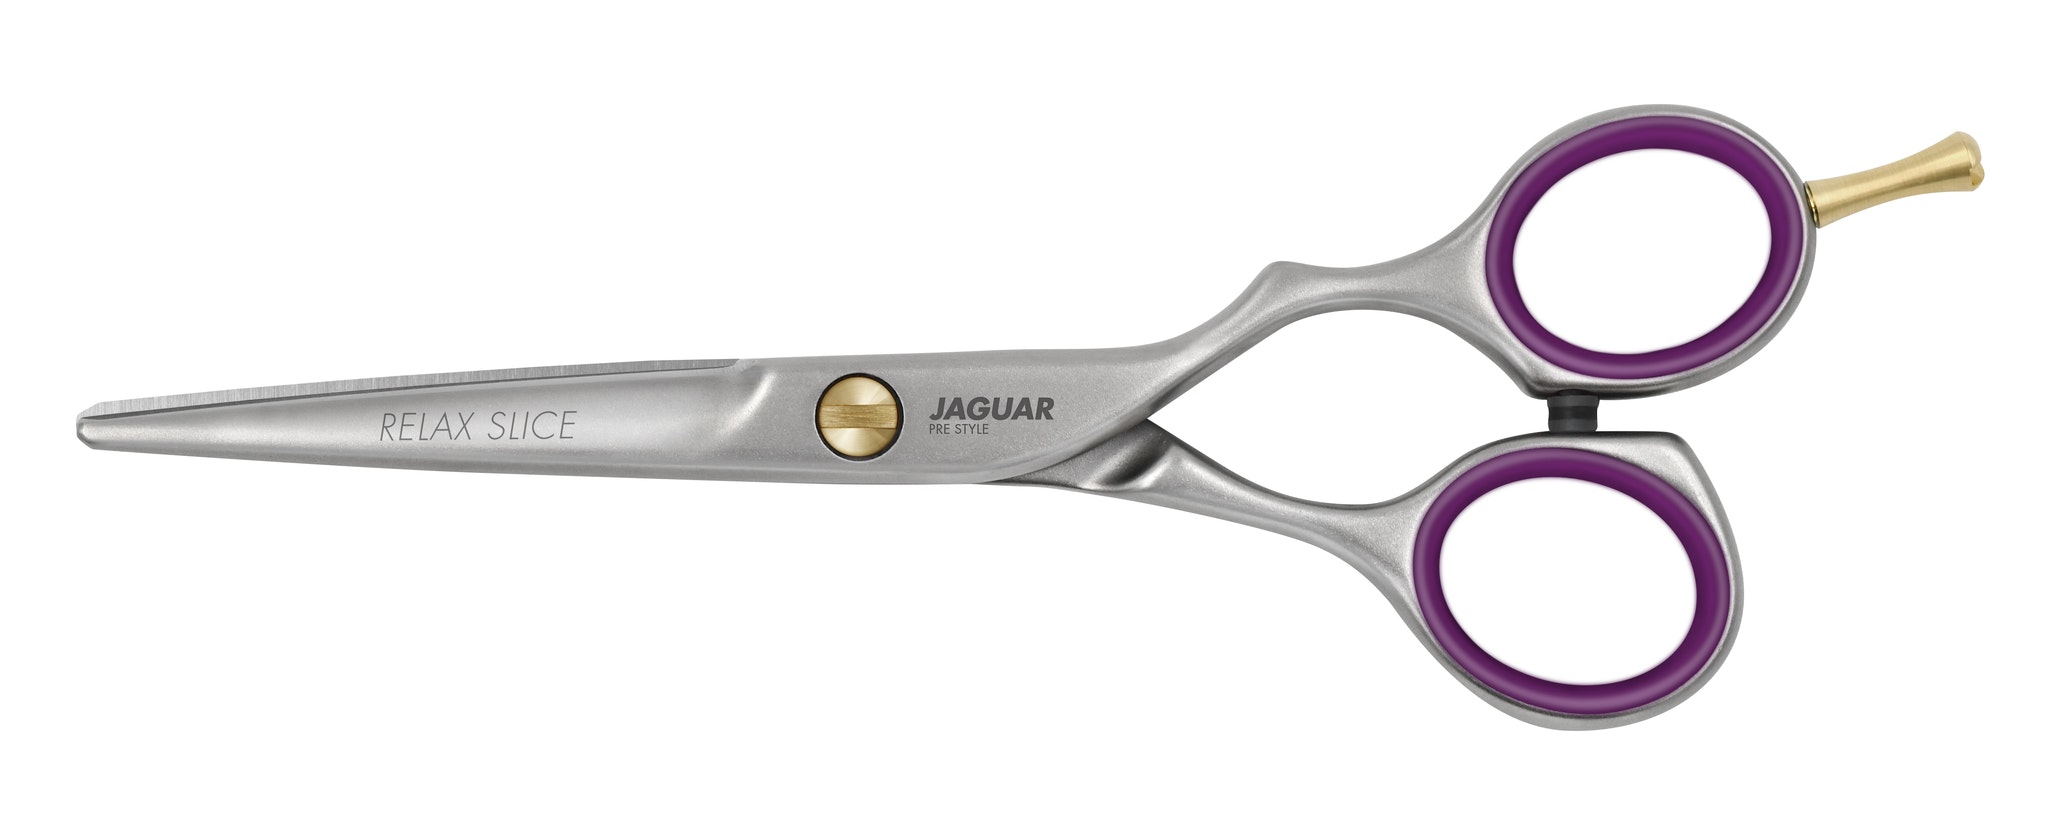 Jaguar Relax Slice Saxset "The Stage Is Yours"